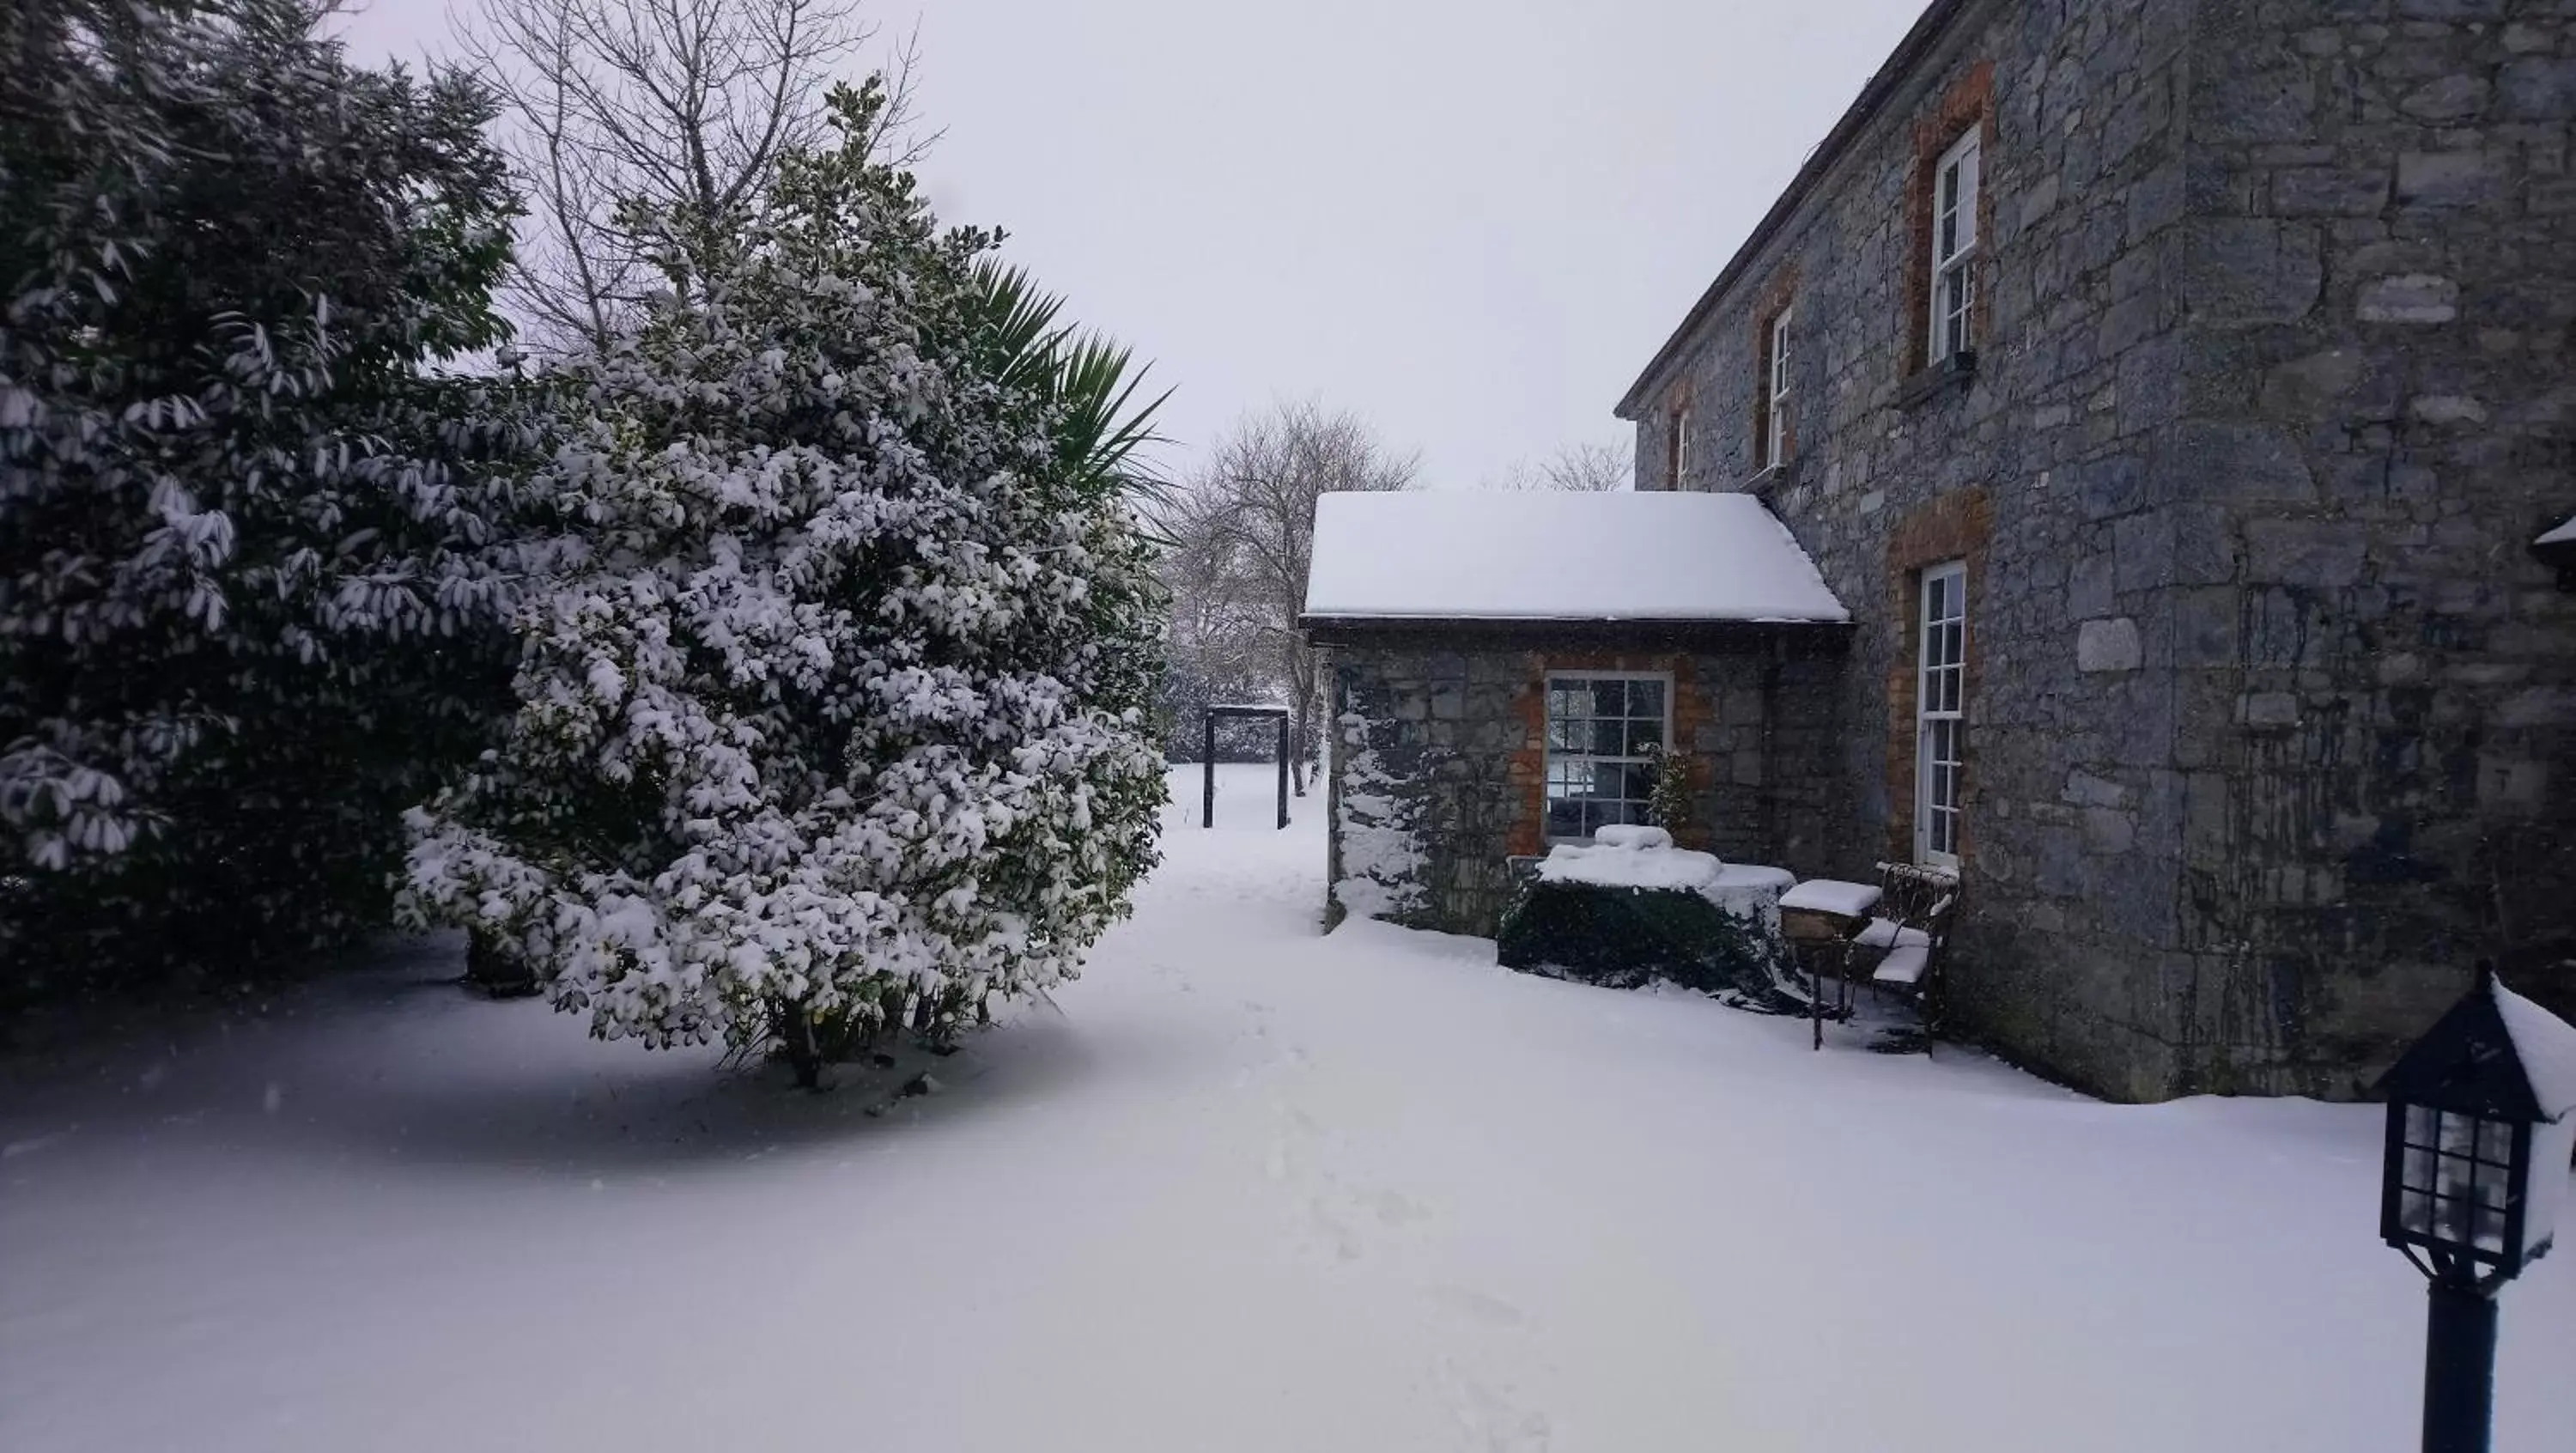 On site, Winter in Knockaderry House